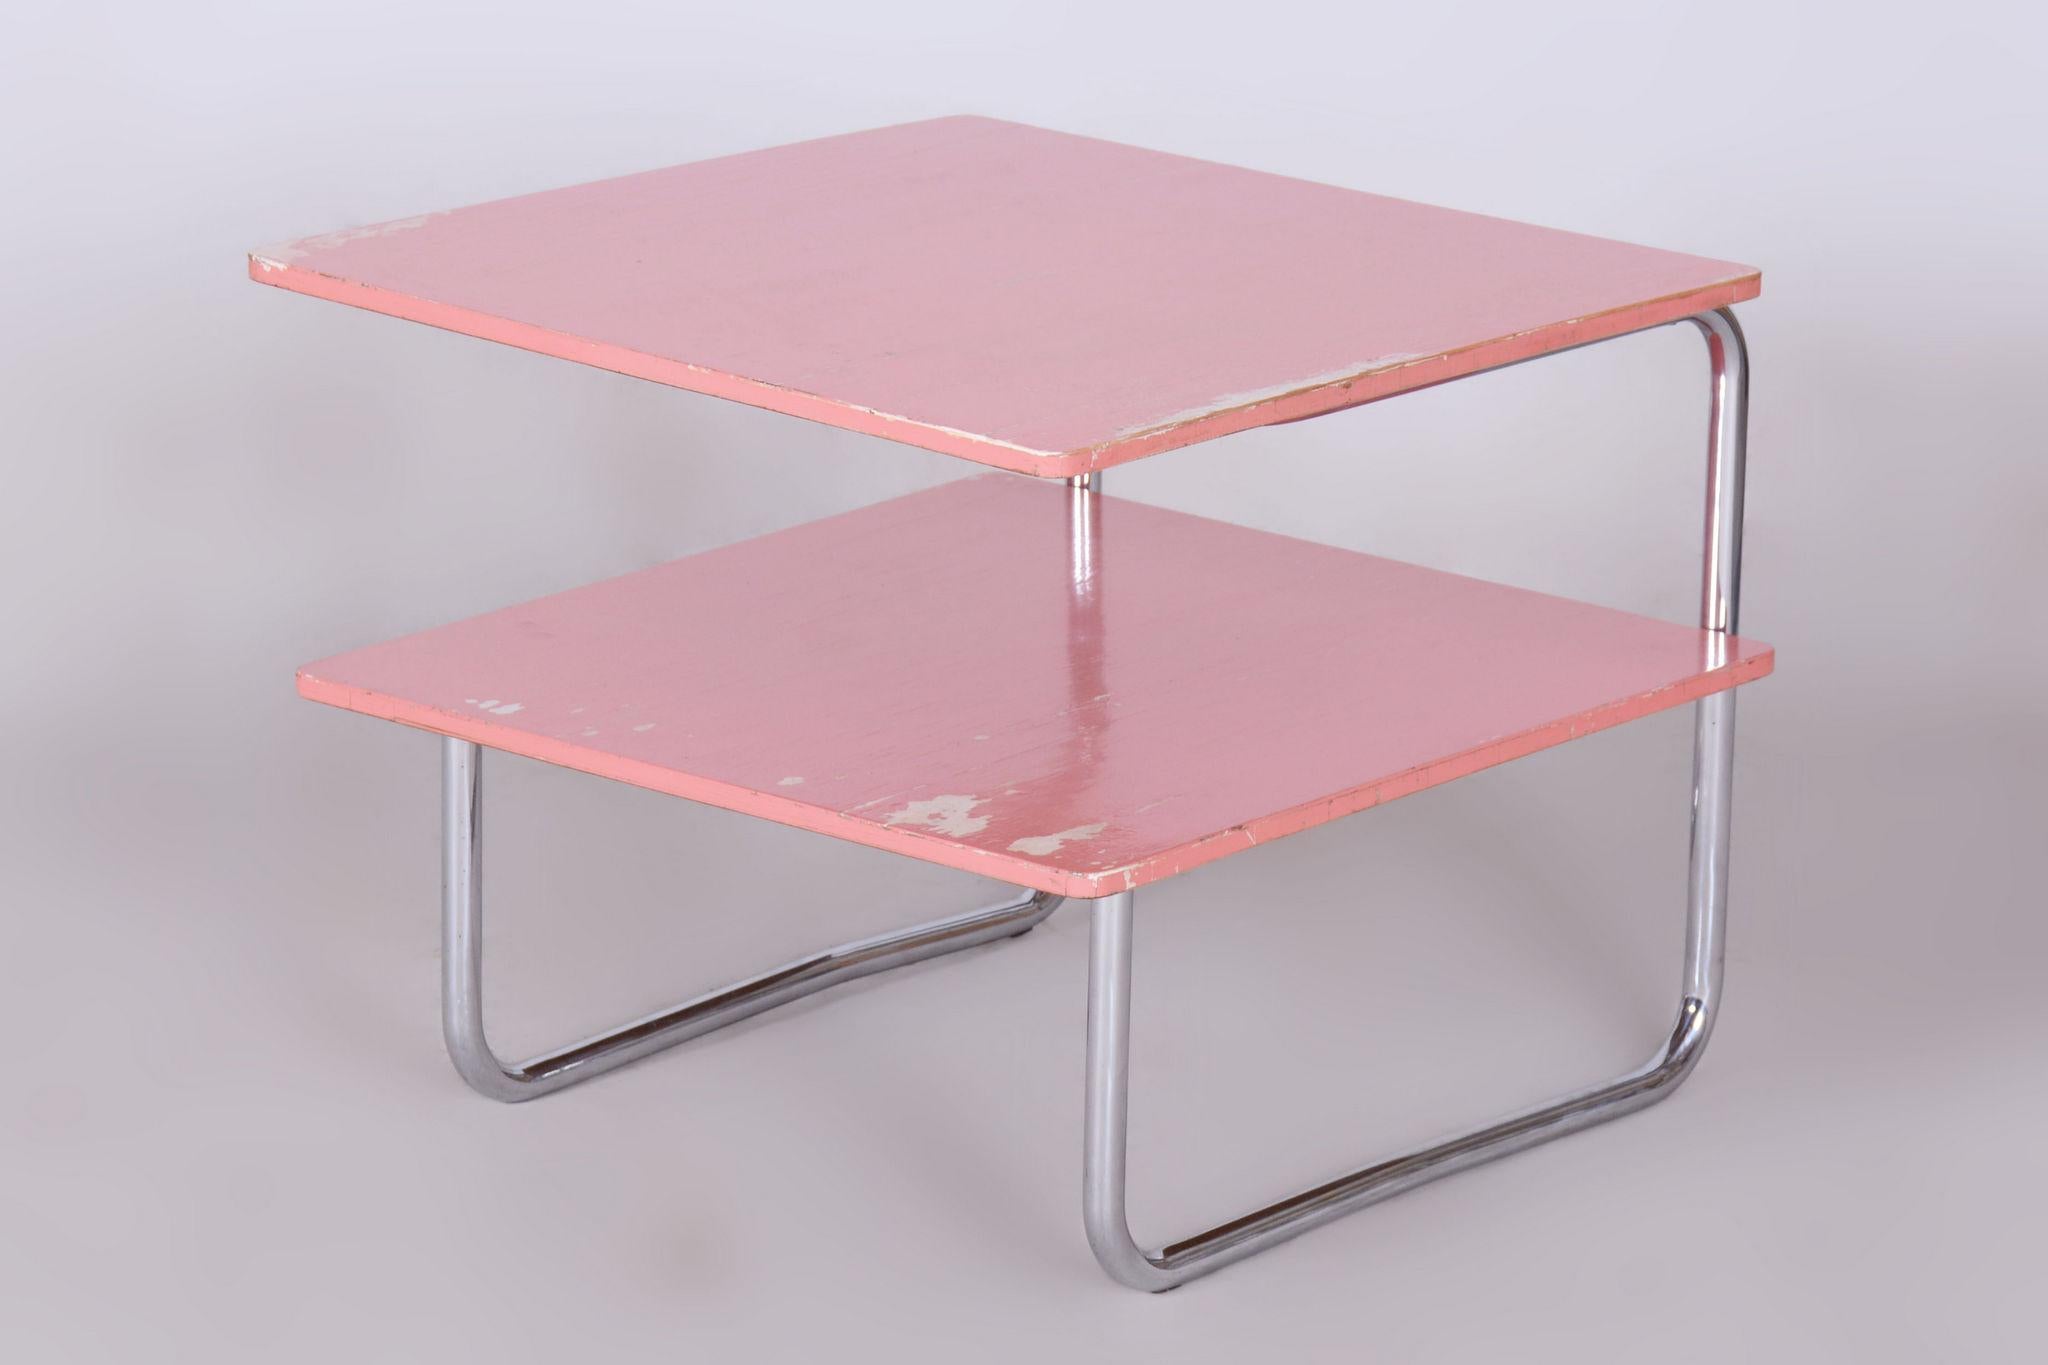 Mid-20th Century Restored Bauhaus Coffee Table, by Mücke Melder, Chrome, Czech, 1930s For Sale